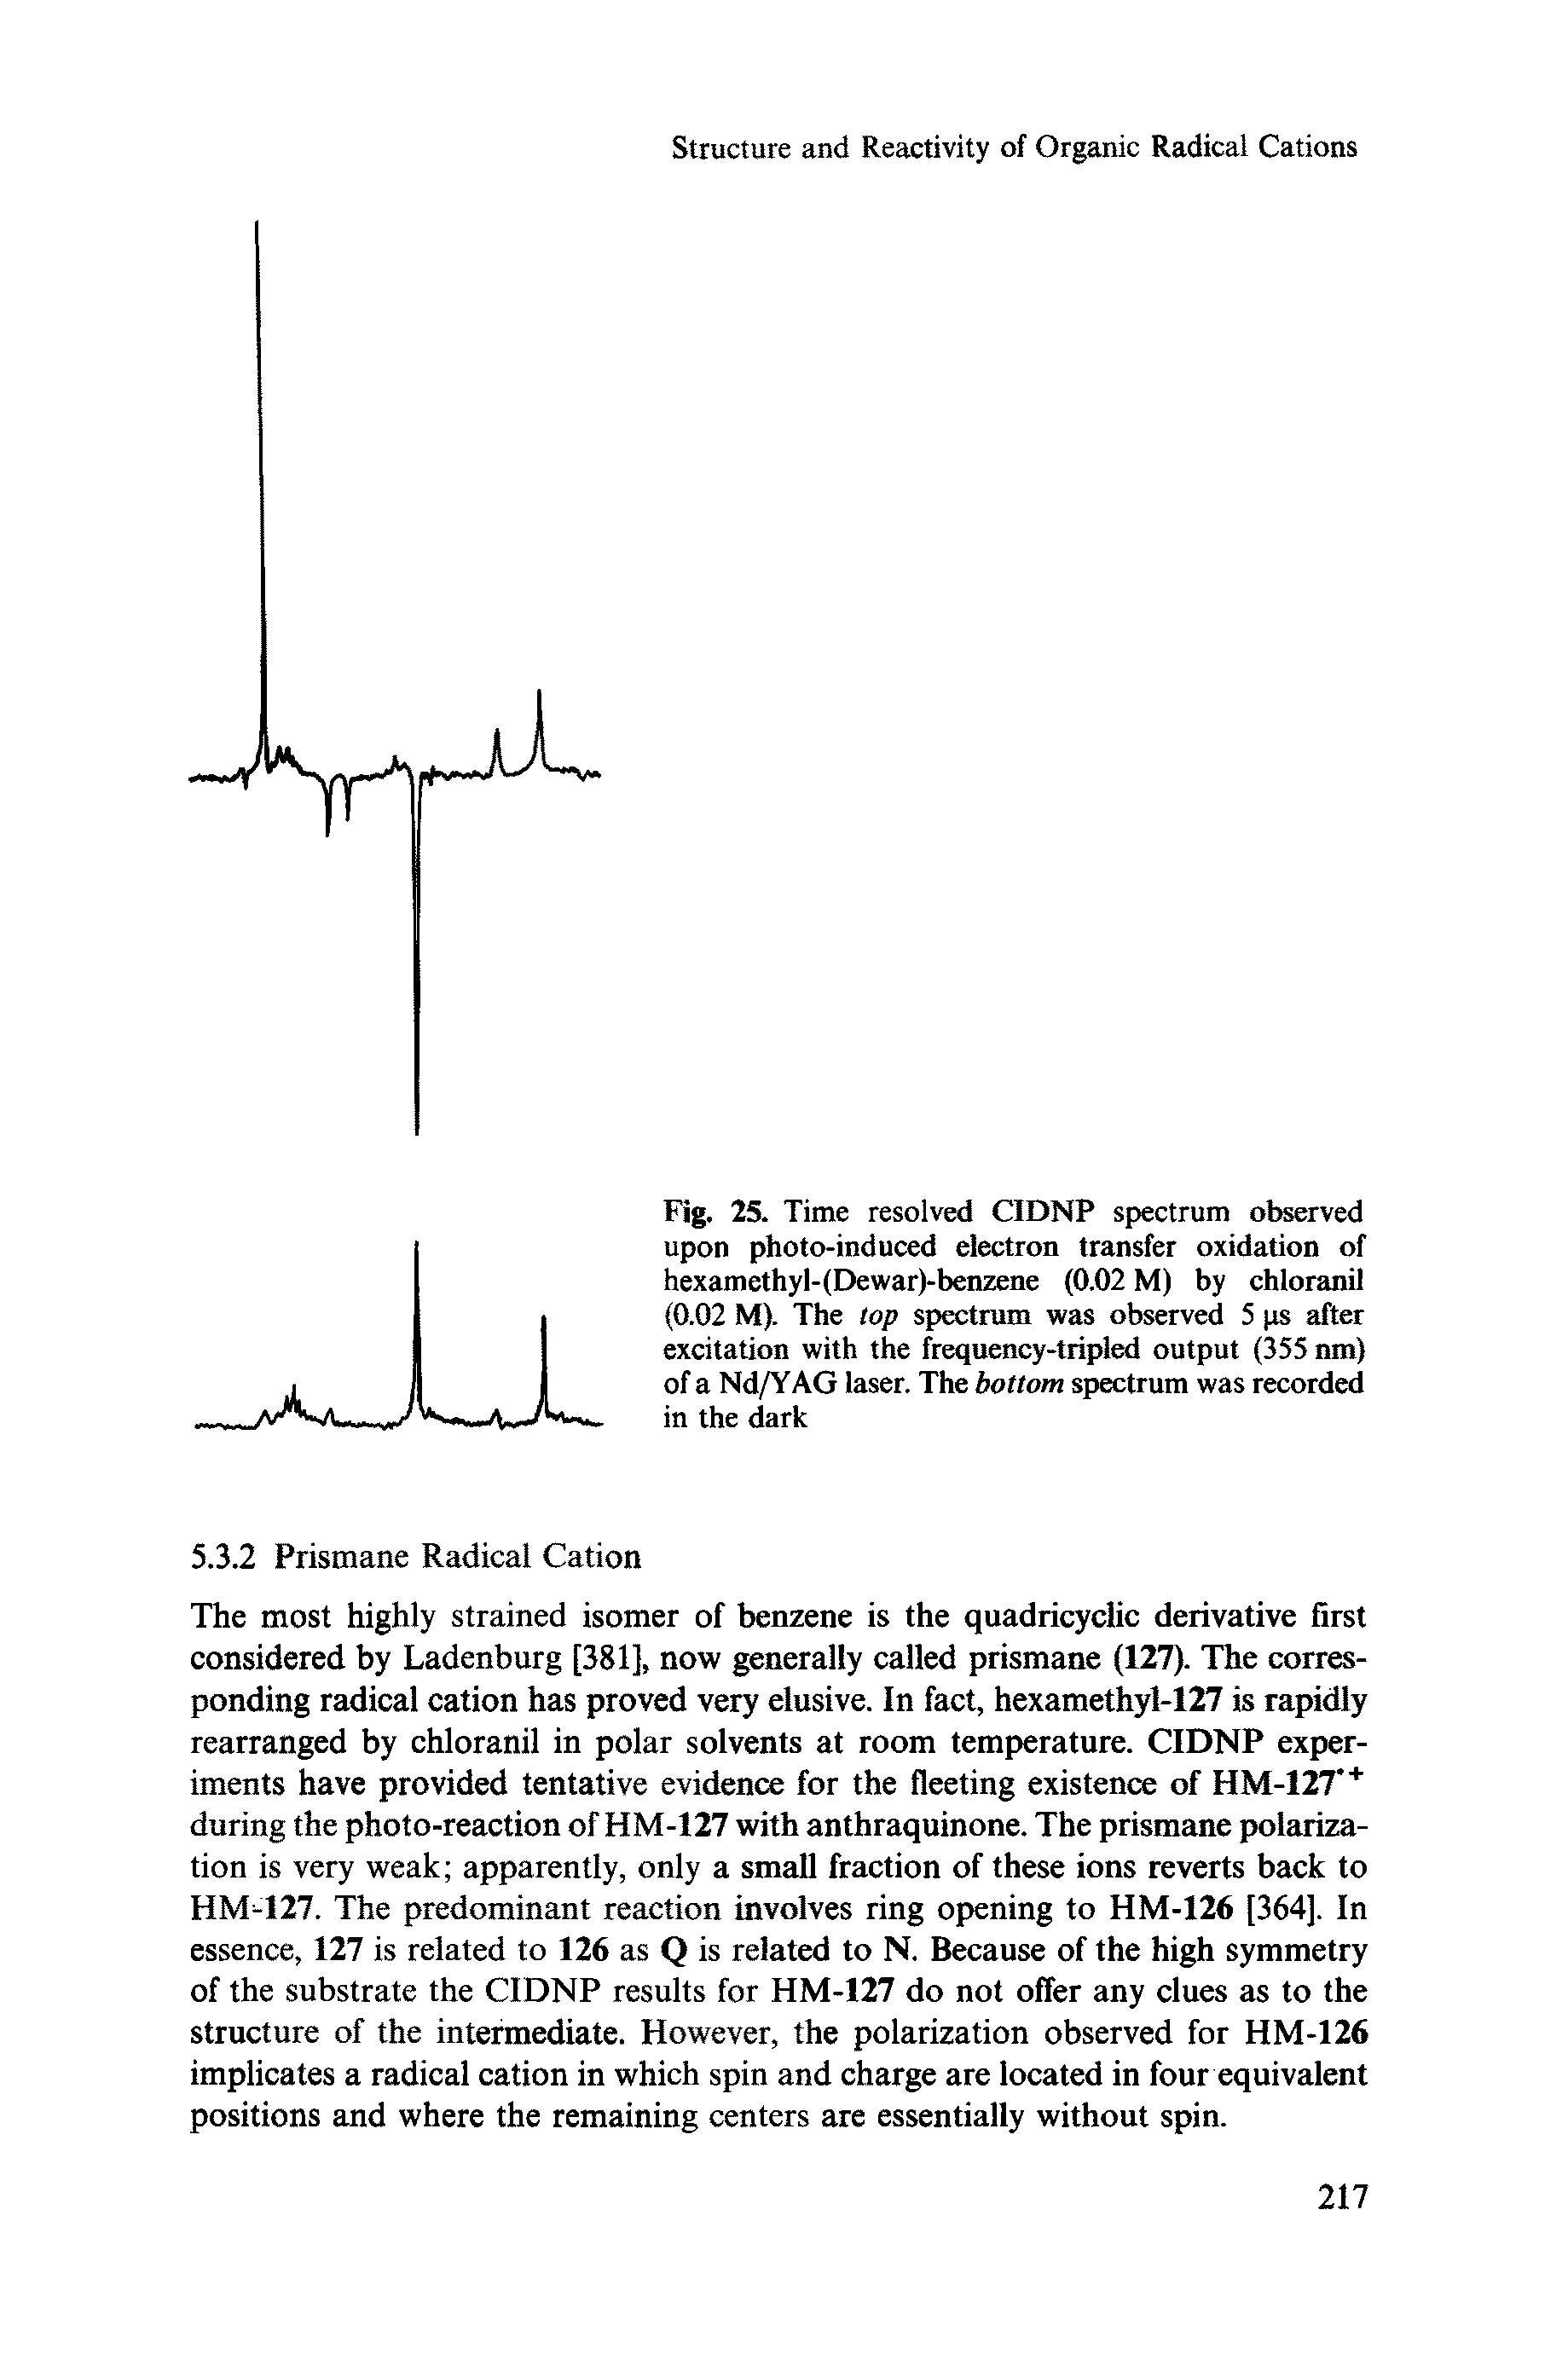 Fig. 25. Time resolved CIDNP spectrum observed upon photo-induced electron transfer oxidation of hexamethyl-(Dewar)-benzene (0.02 M) by chloranil (0.02 M). The top spectrum was observed 5 ps after excitation with the frequency-tripled output (355 nm) of a Nd/YAG laser. The bottom spectrum was recorded in the dark...